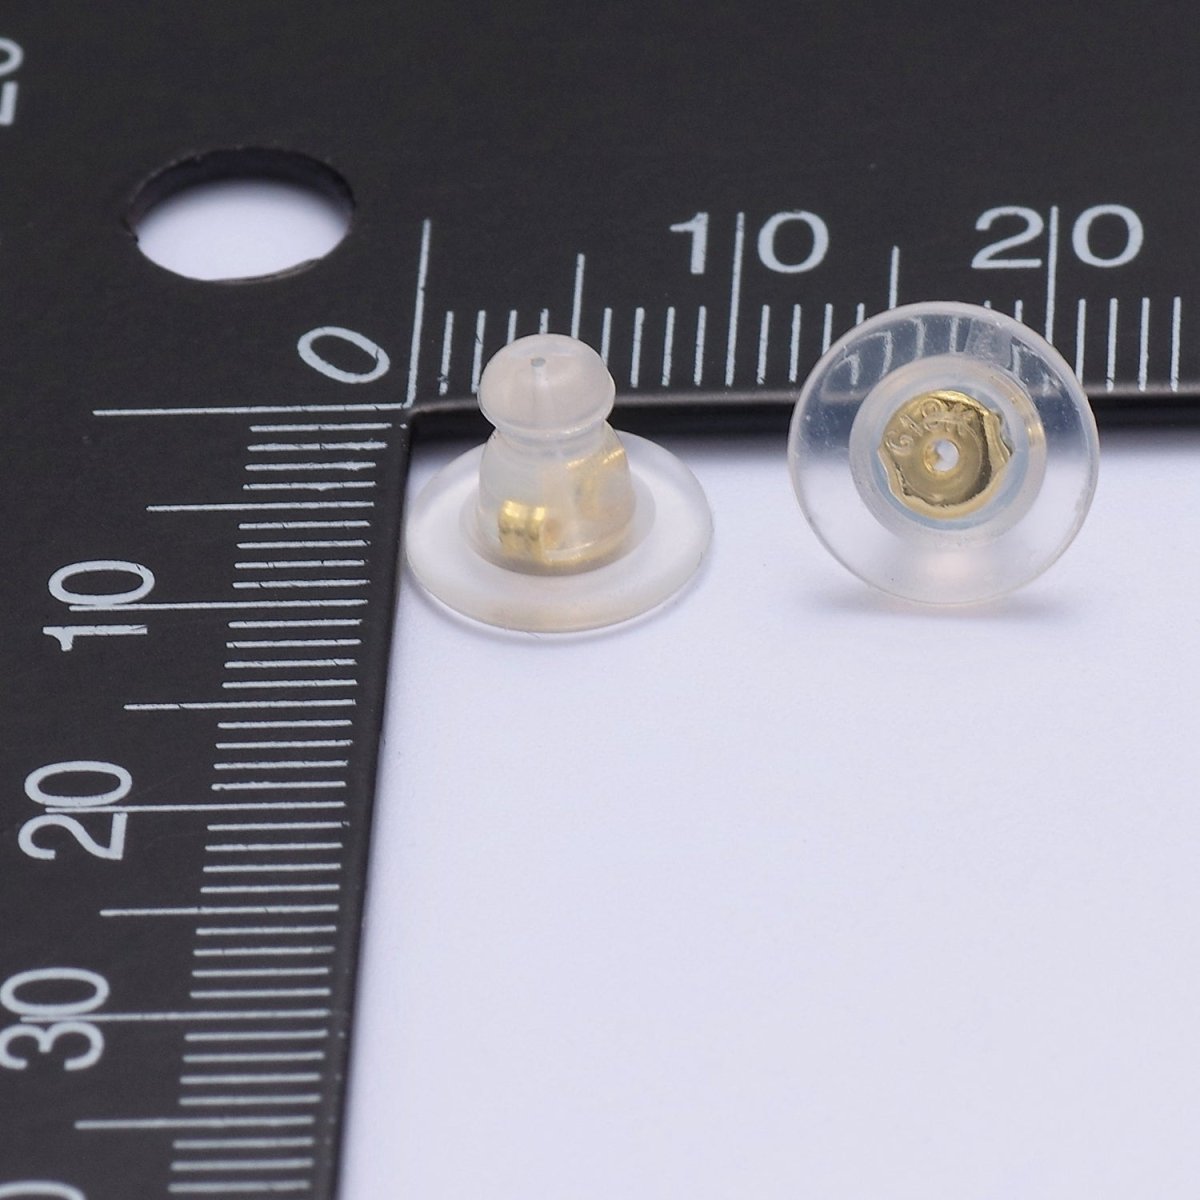 OS Bullet Clutch Earring Backs for Studs with Pad Rubber Earring Stoppers Pierced Safety Backs K-231 - DLUXCA